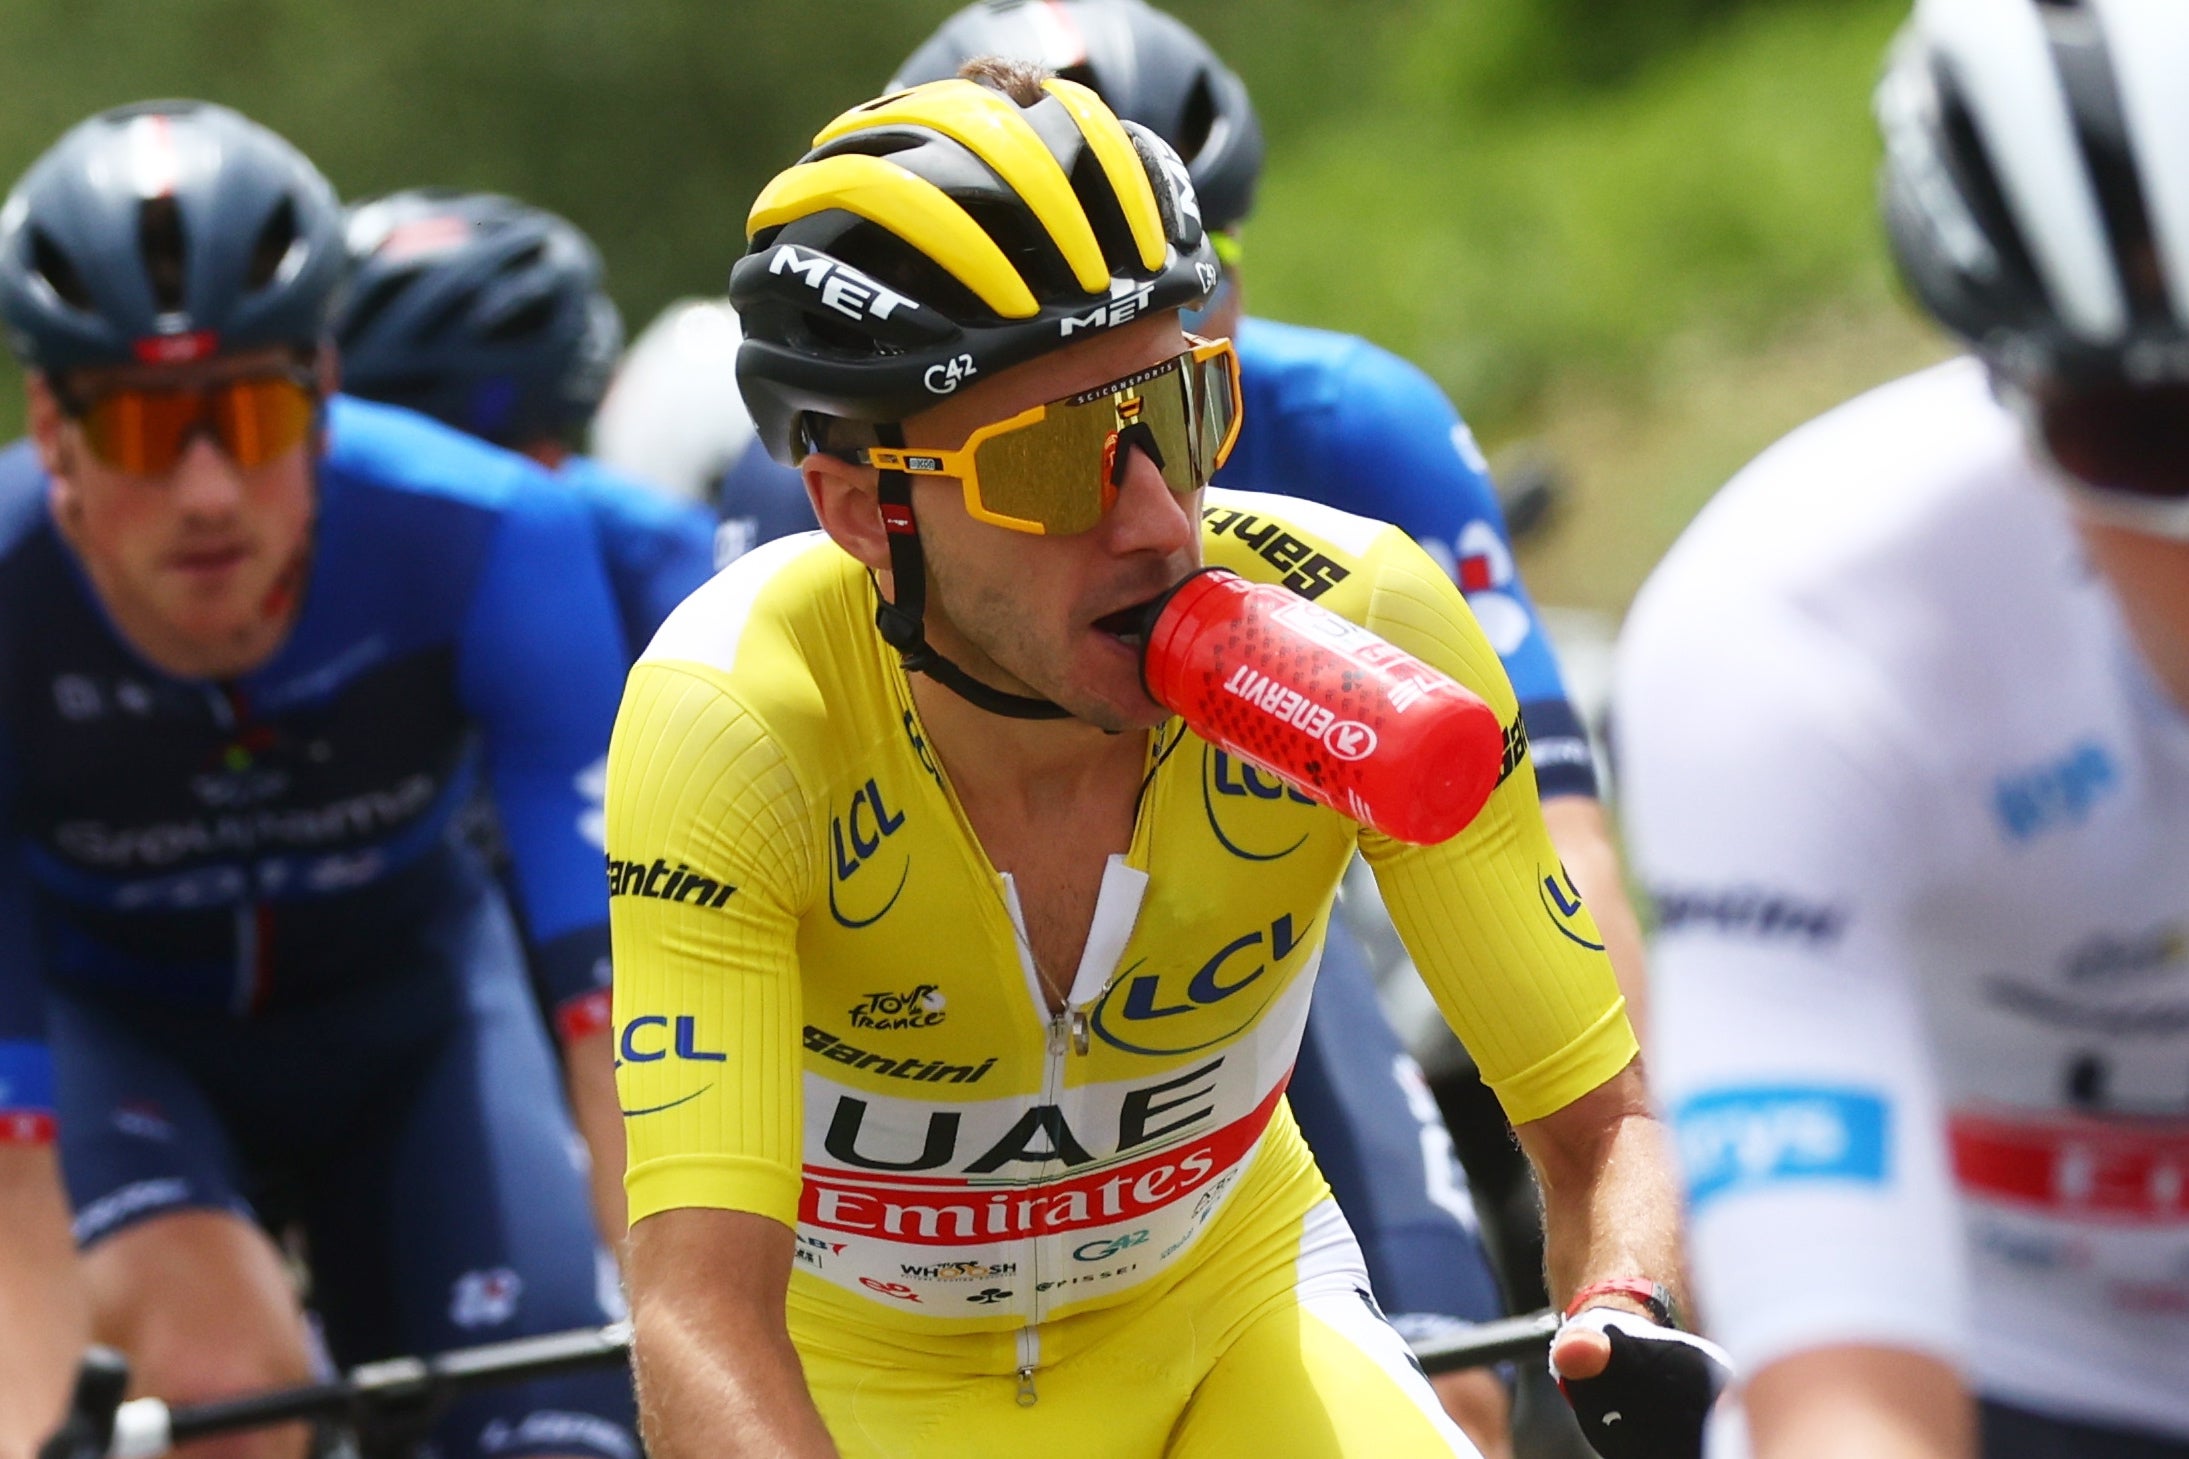 Tour de France on TV Channel, start time and how to watch highlights